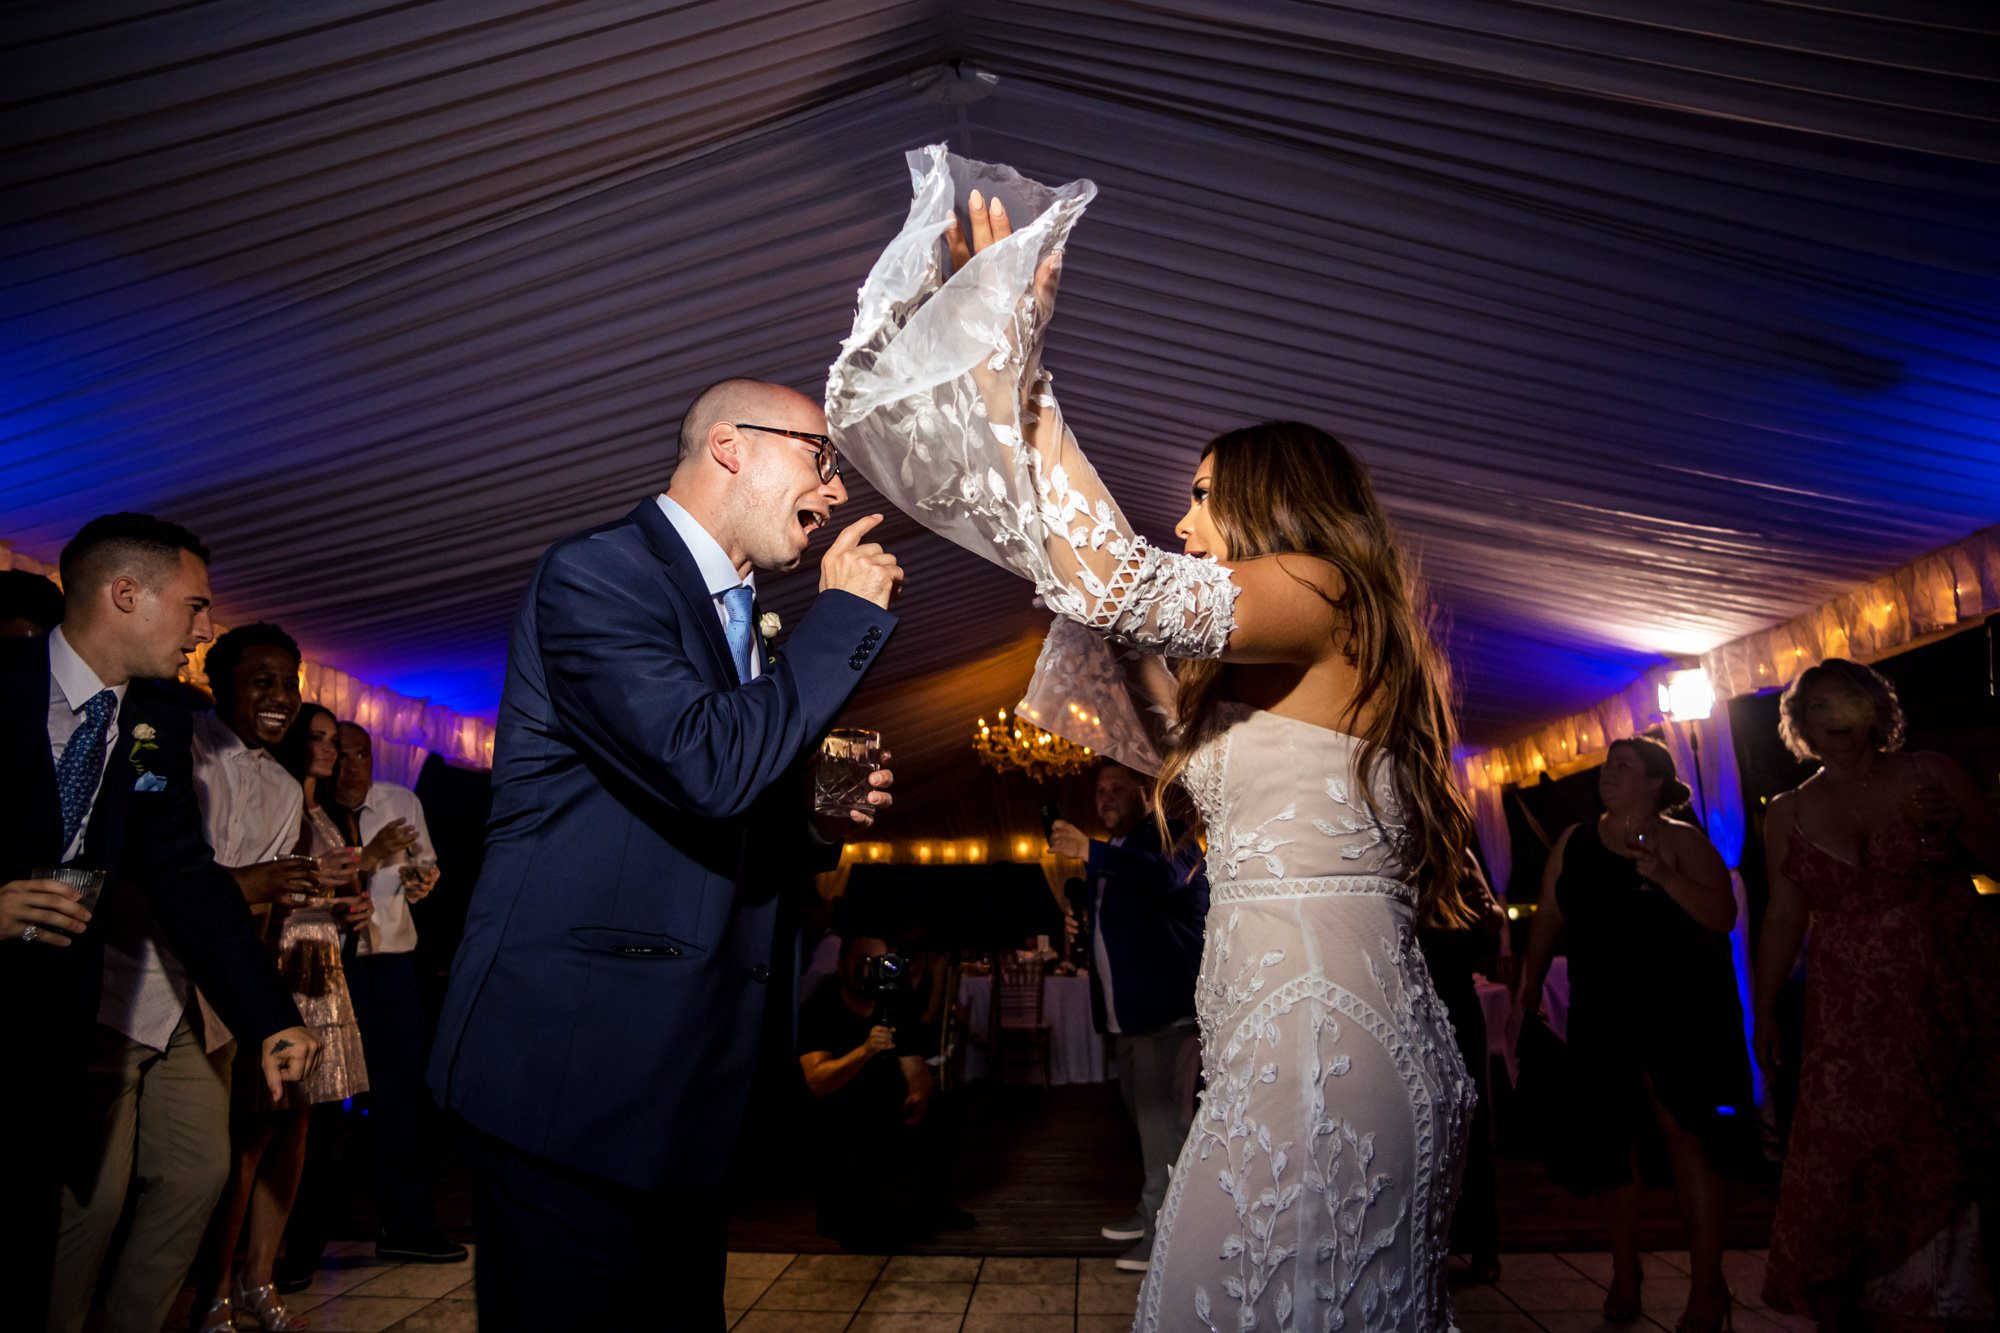 A bride and groom dancing at their Key West wedding reception.